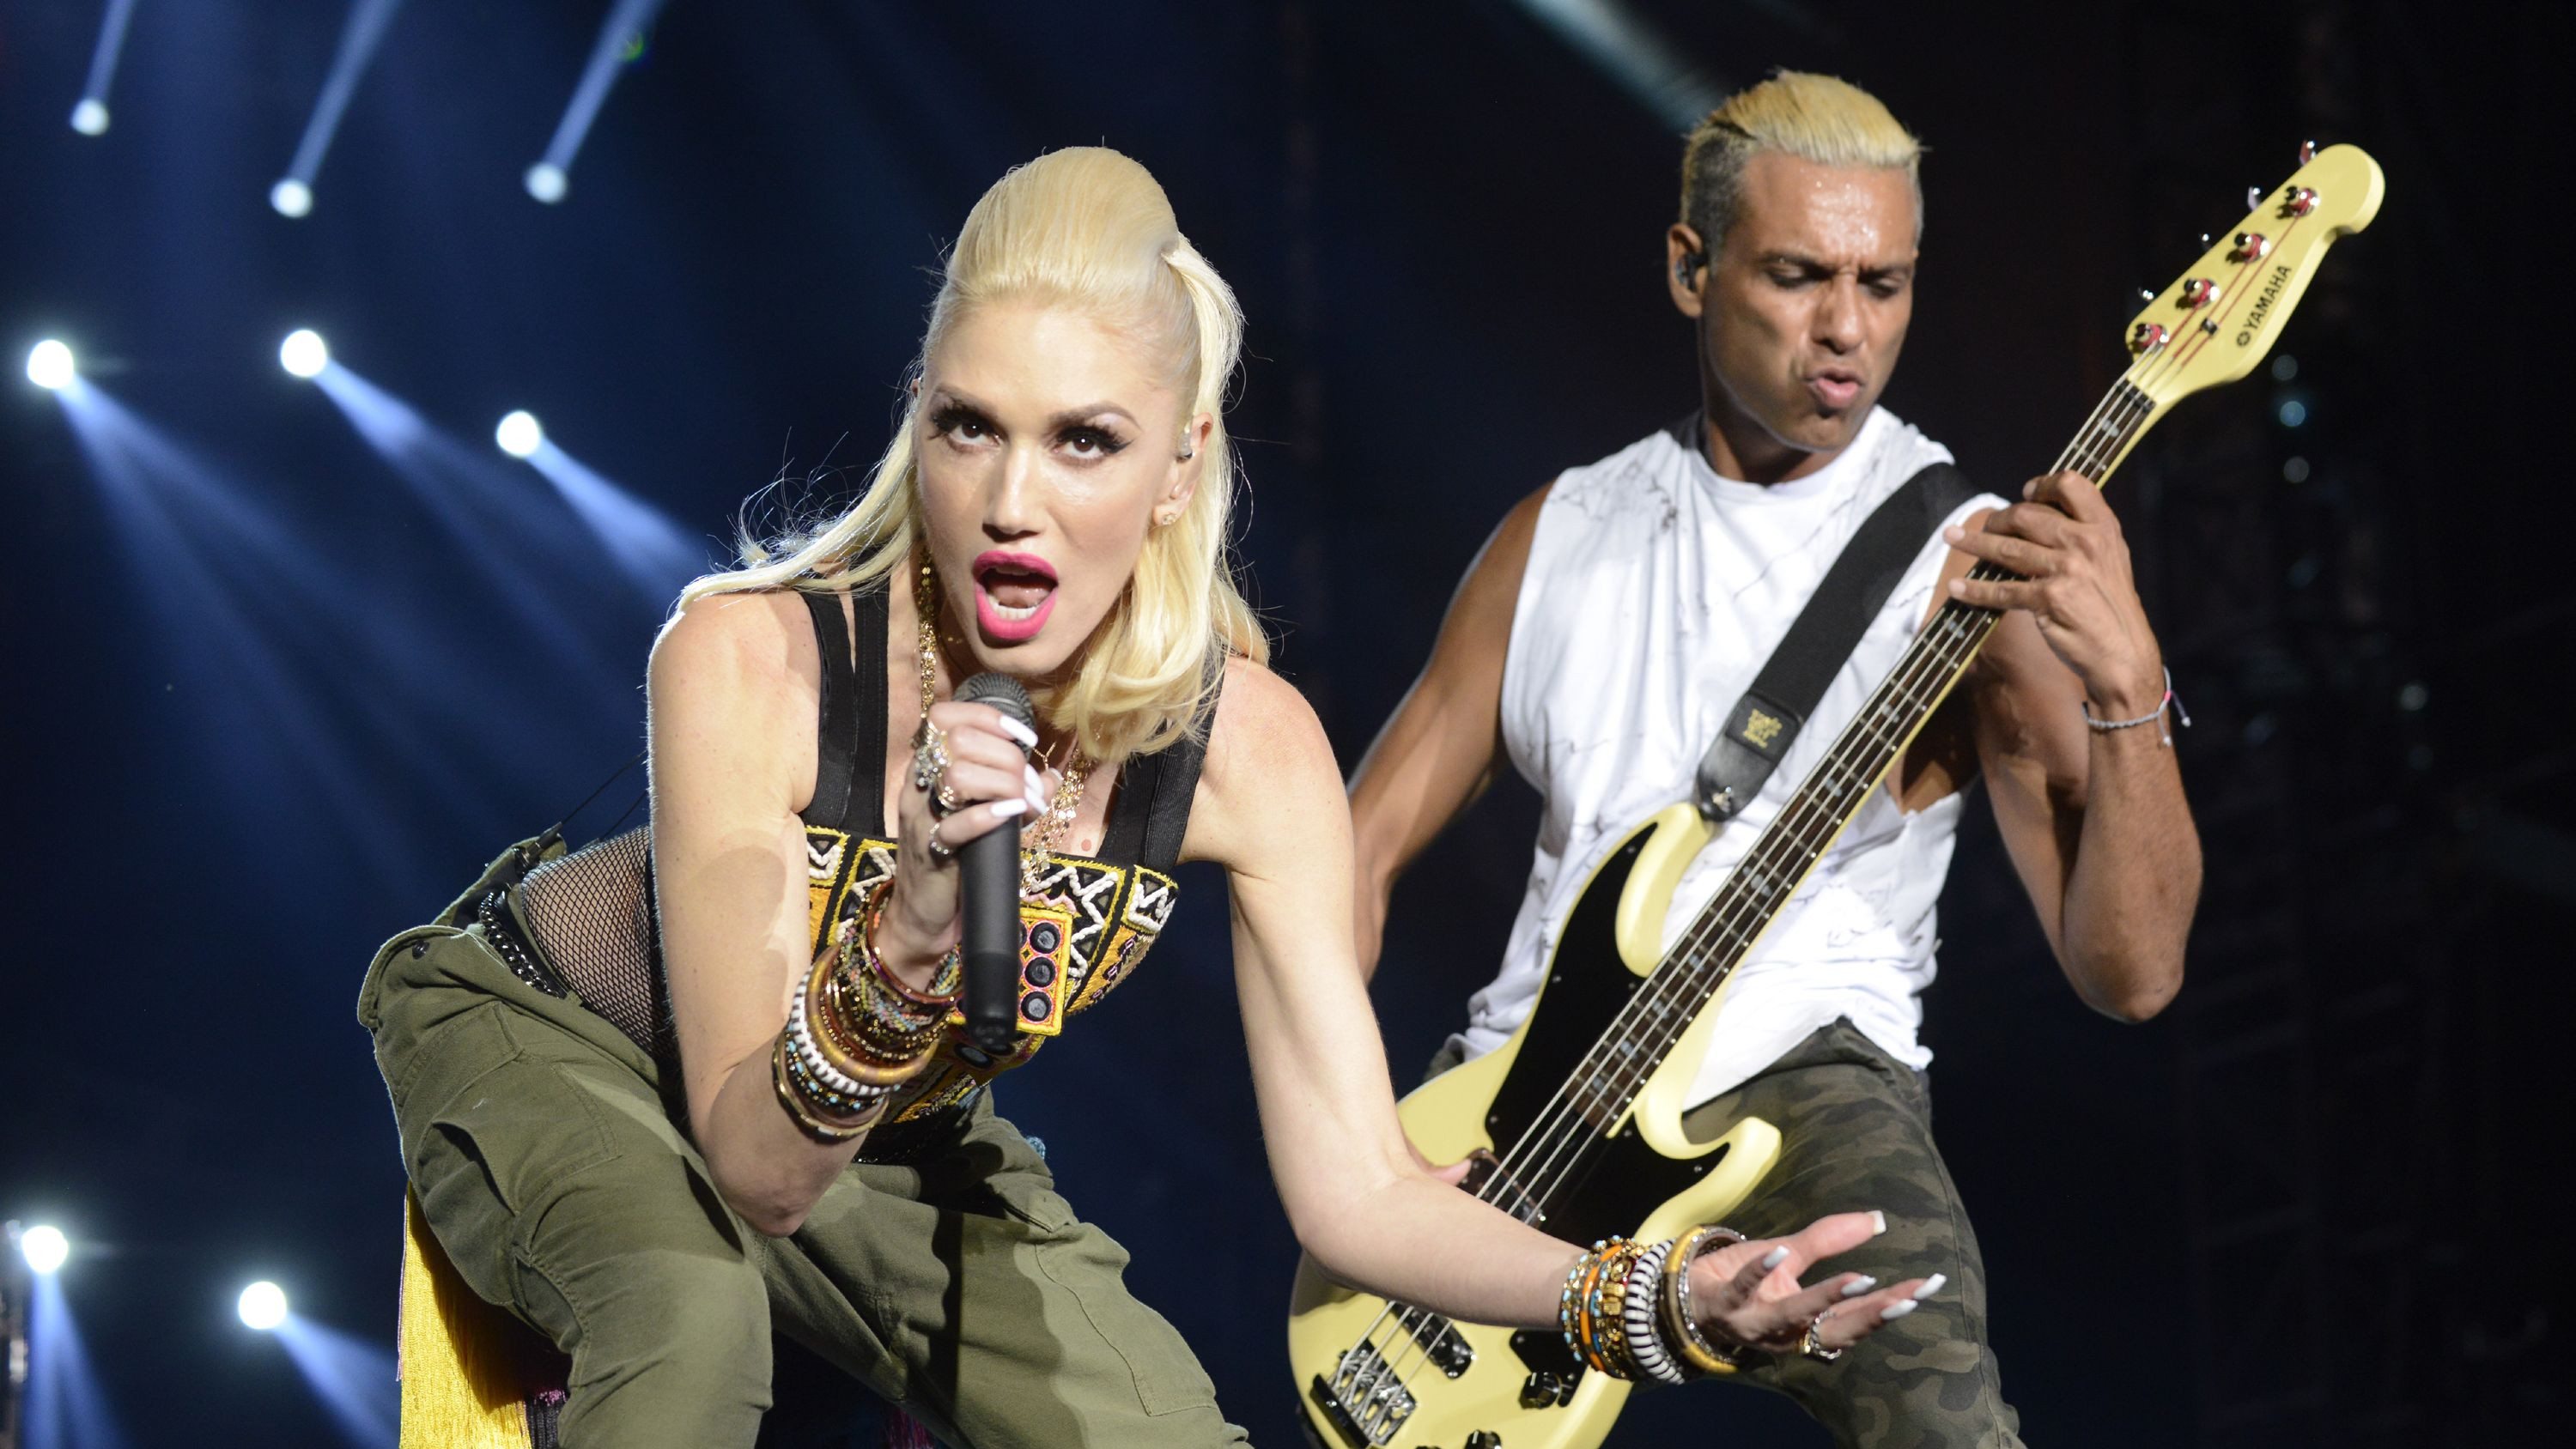 No Doubt Just Replaced Gwen Stefani—with A Guy No Doubt Begins Working With Afi Singer Davey